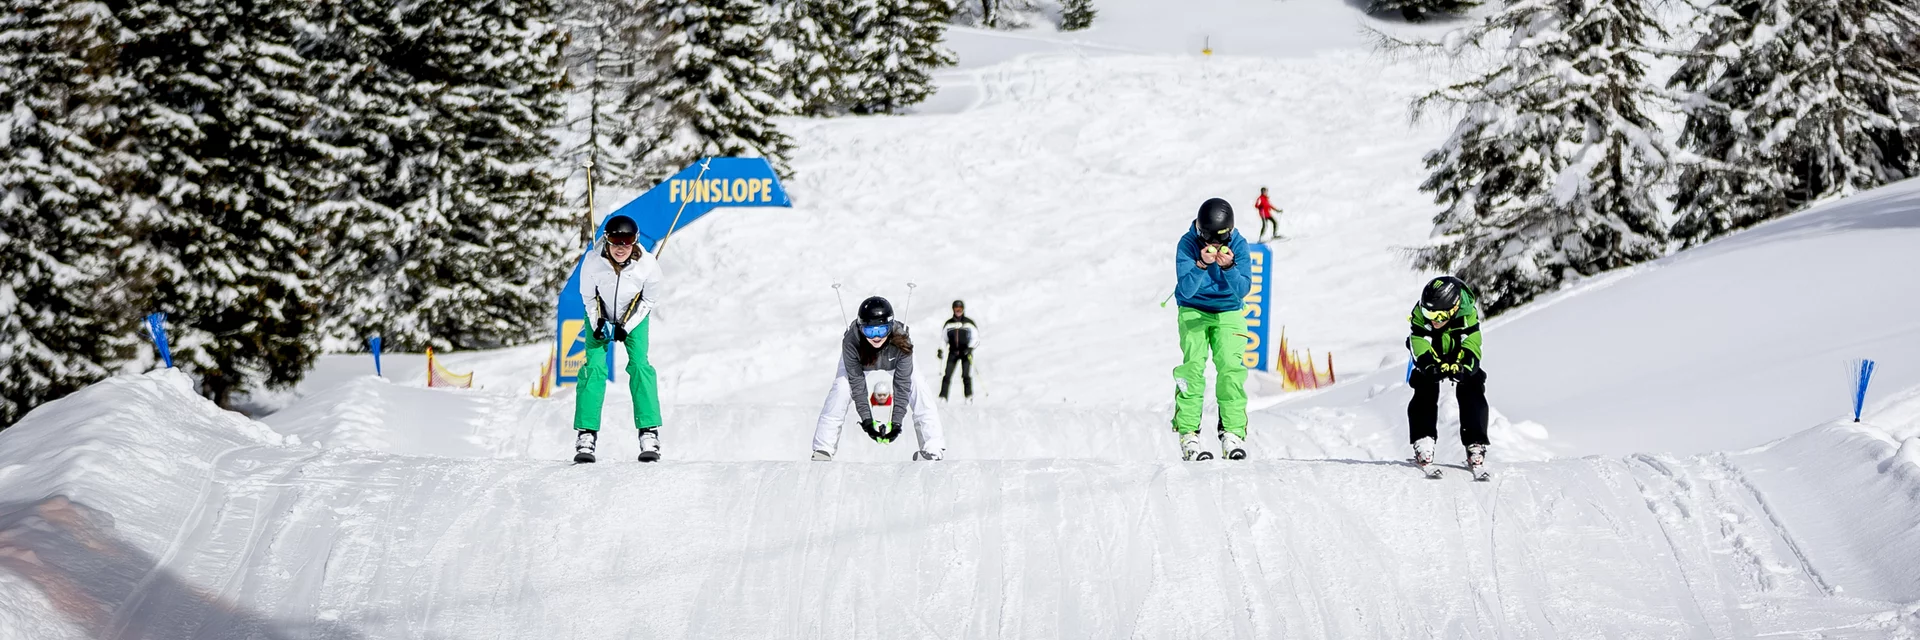 Skier-yout on the Fun Slope at the Hauser Kaibling | © Steiermark Tourismus | Tom Lamm